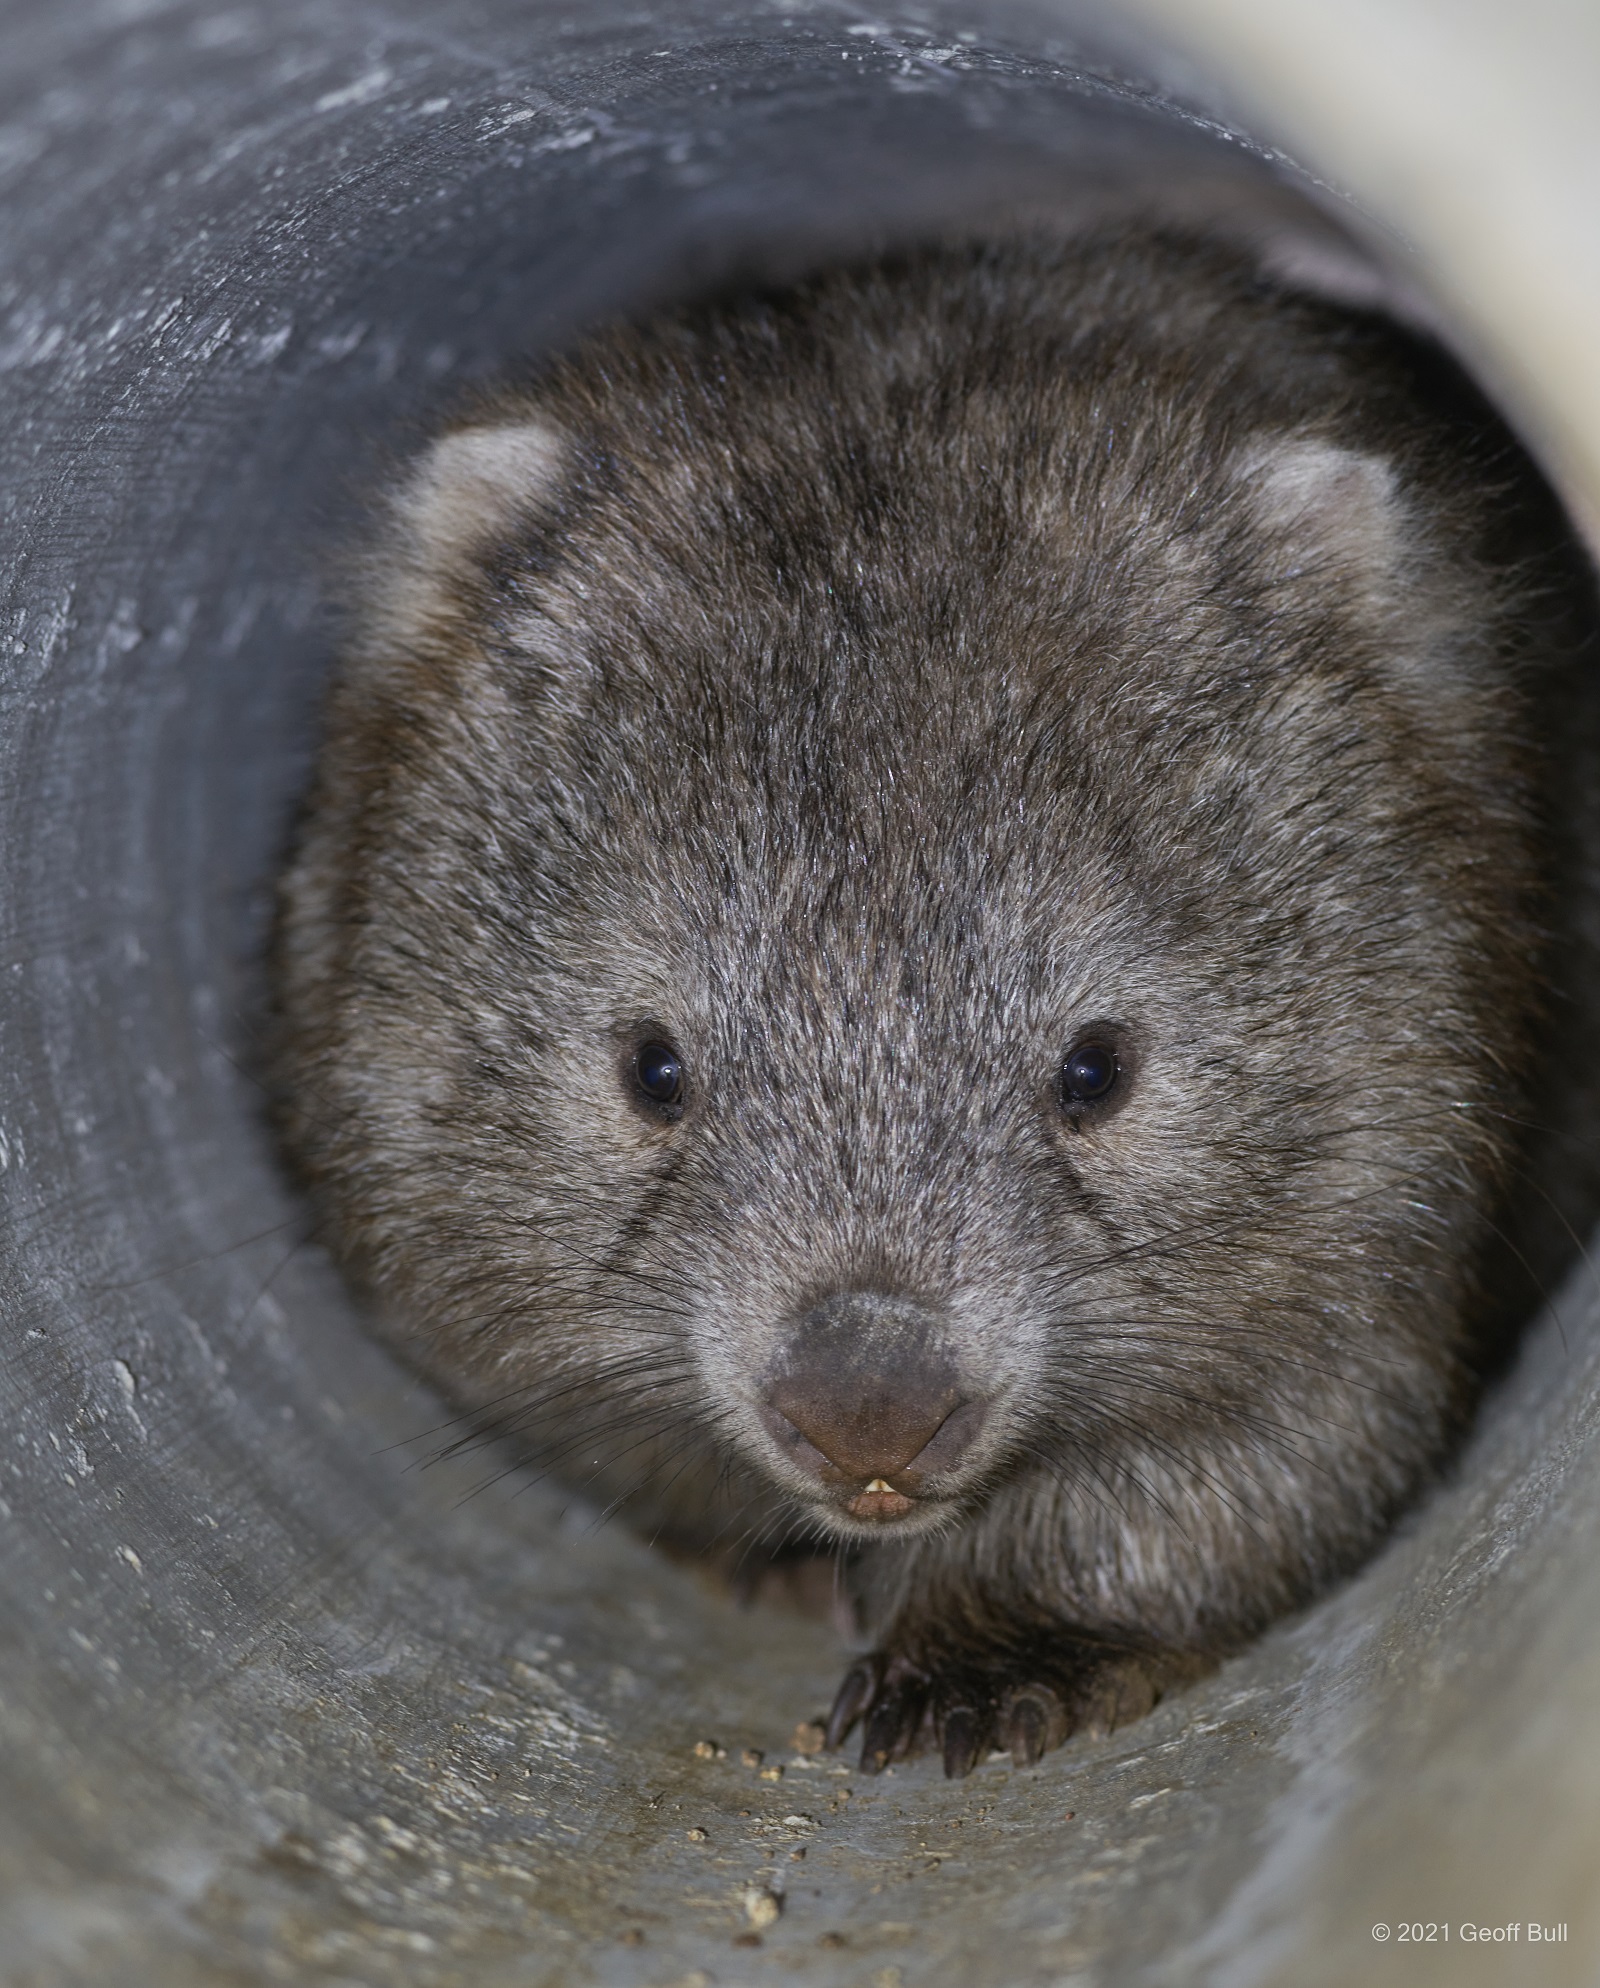 Our people capturing the world around us. An image of a wombat crawling through a pipe.